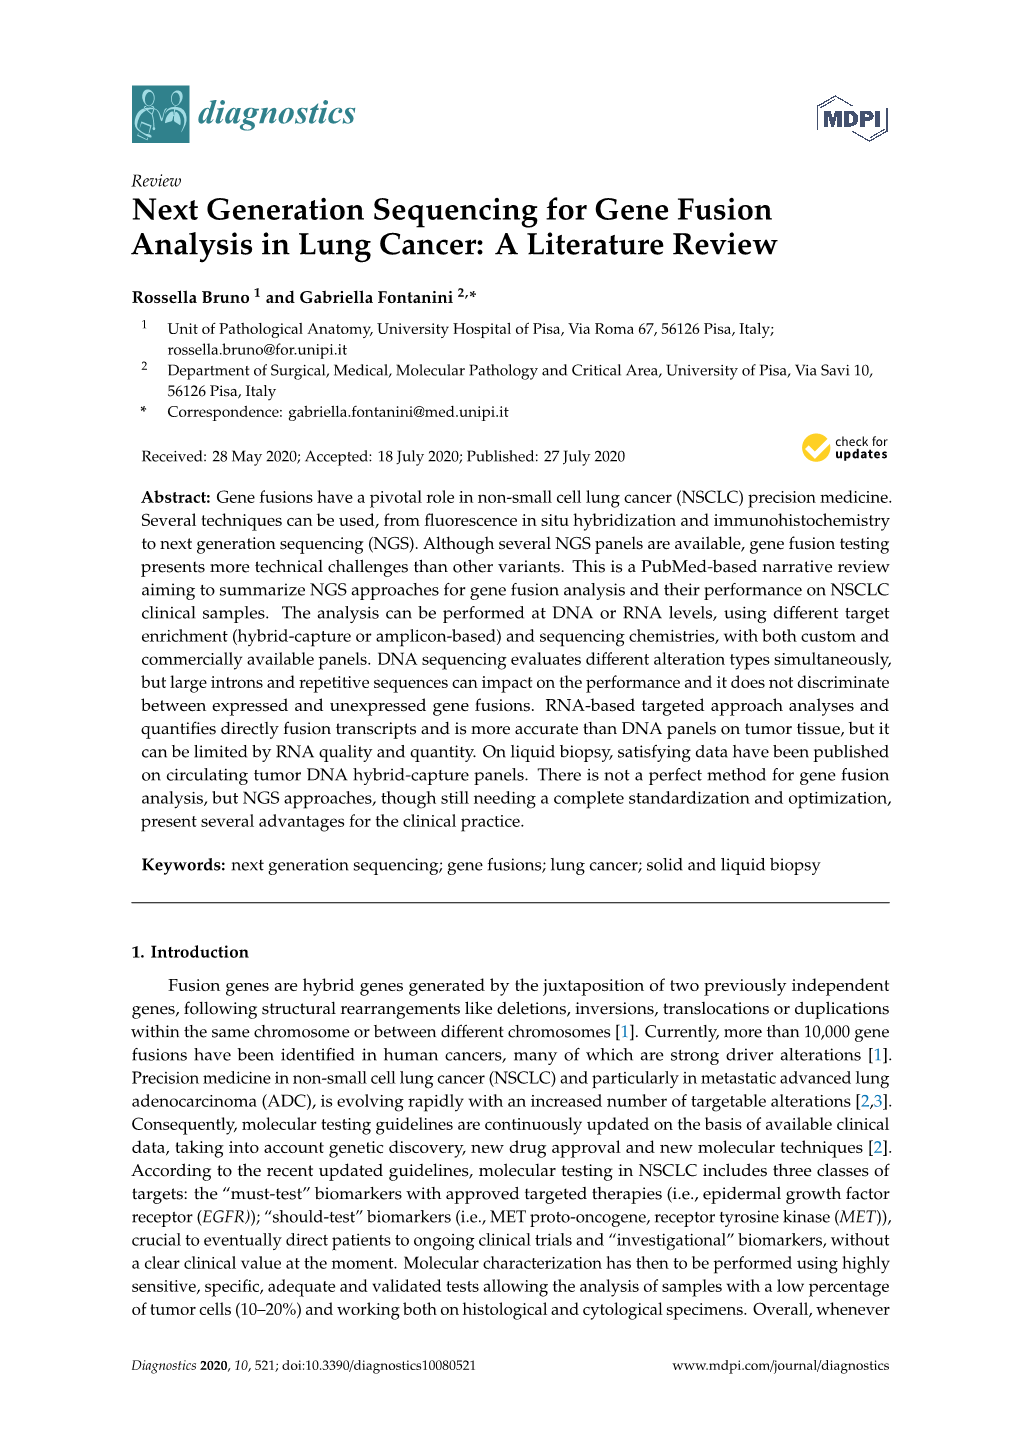 Next Generation Sequencing for Gene Fusion Analysis in Lung Cancer: a Literature Review